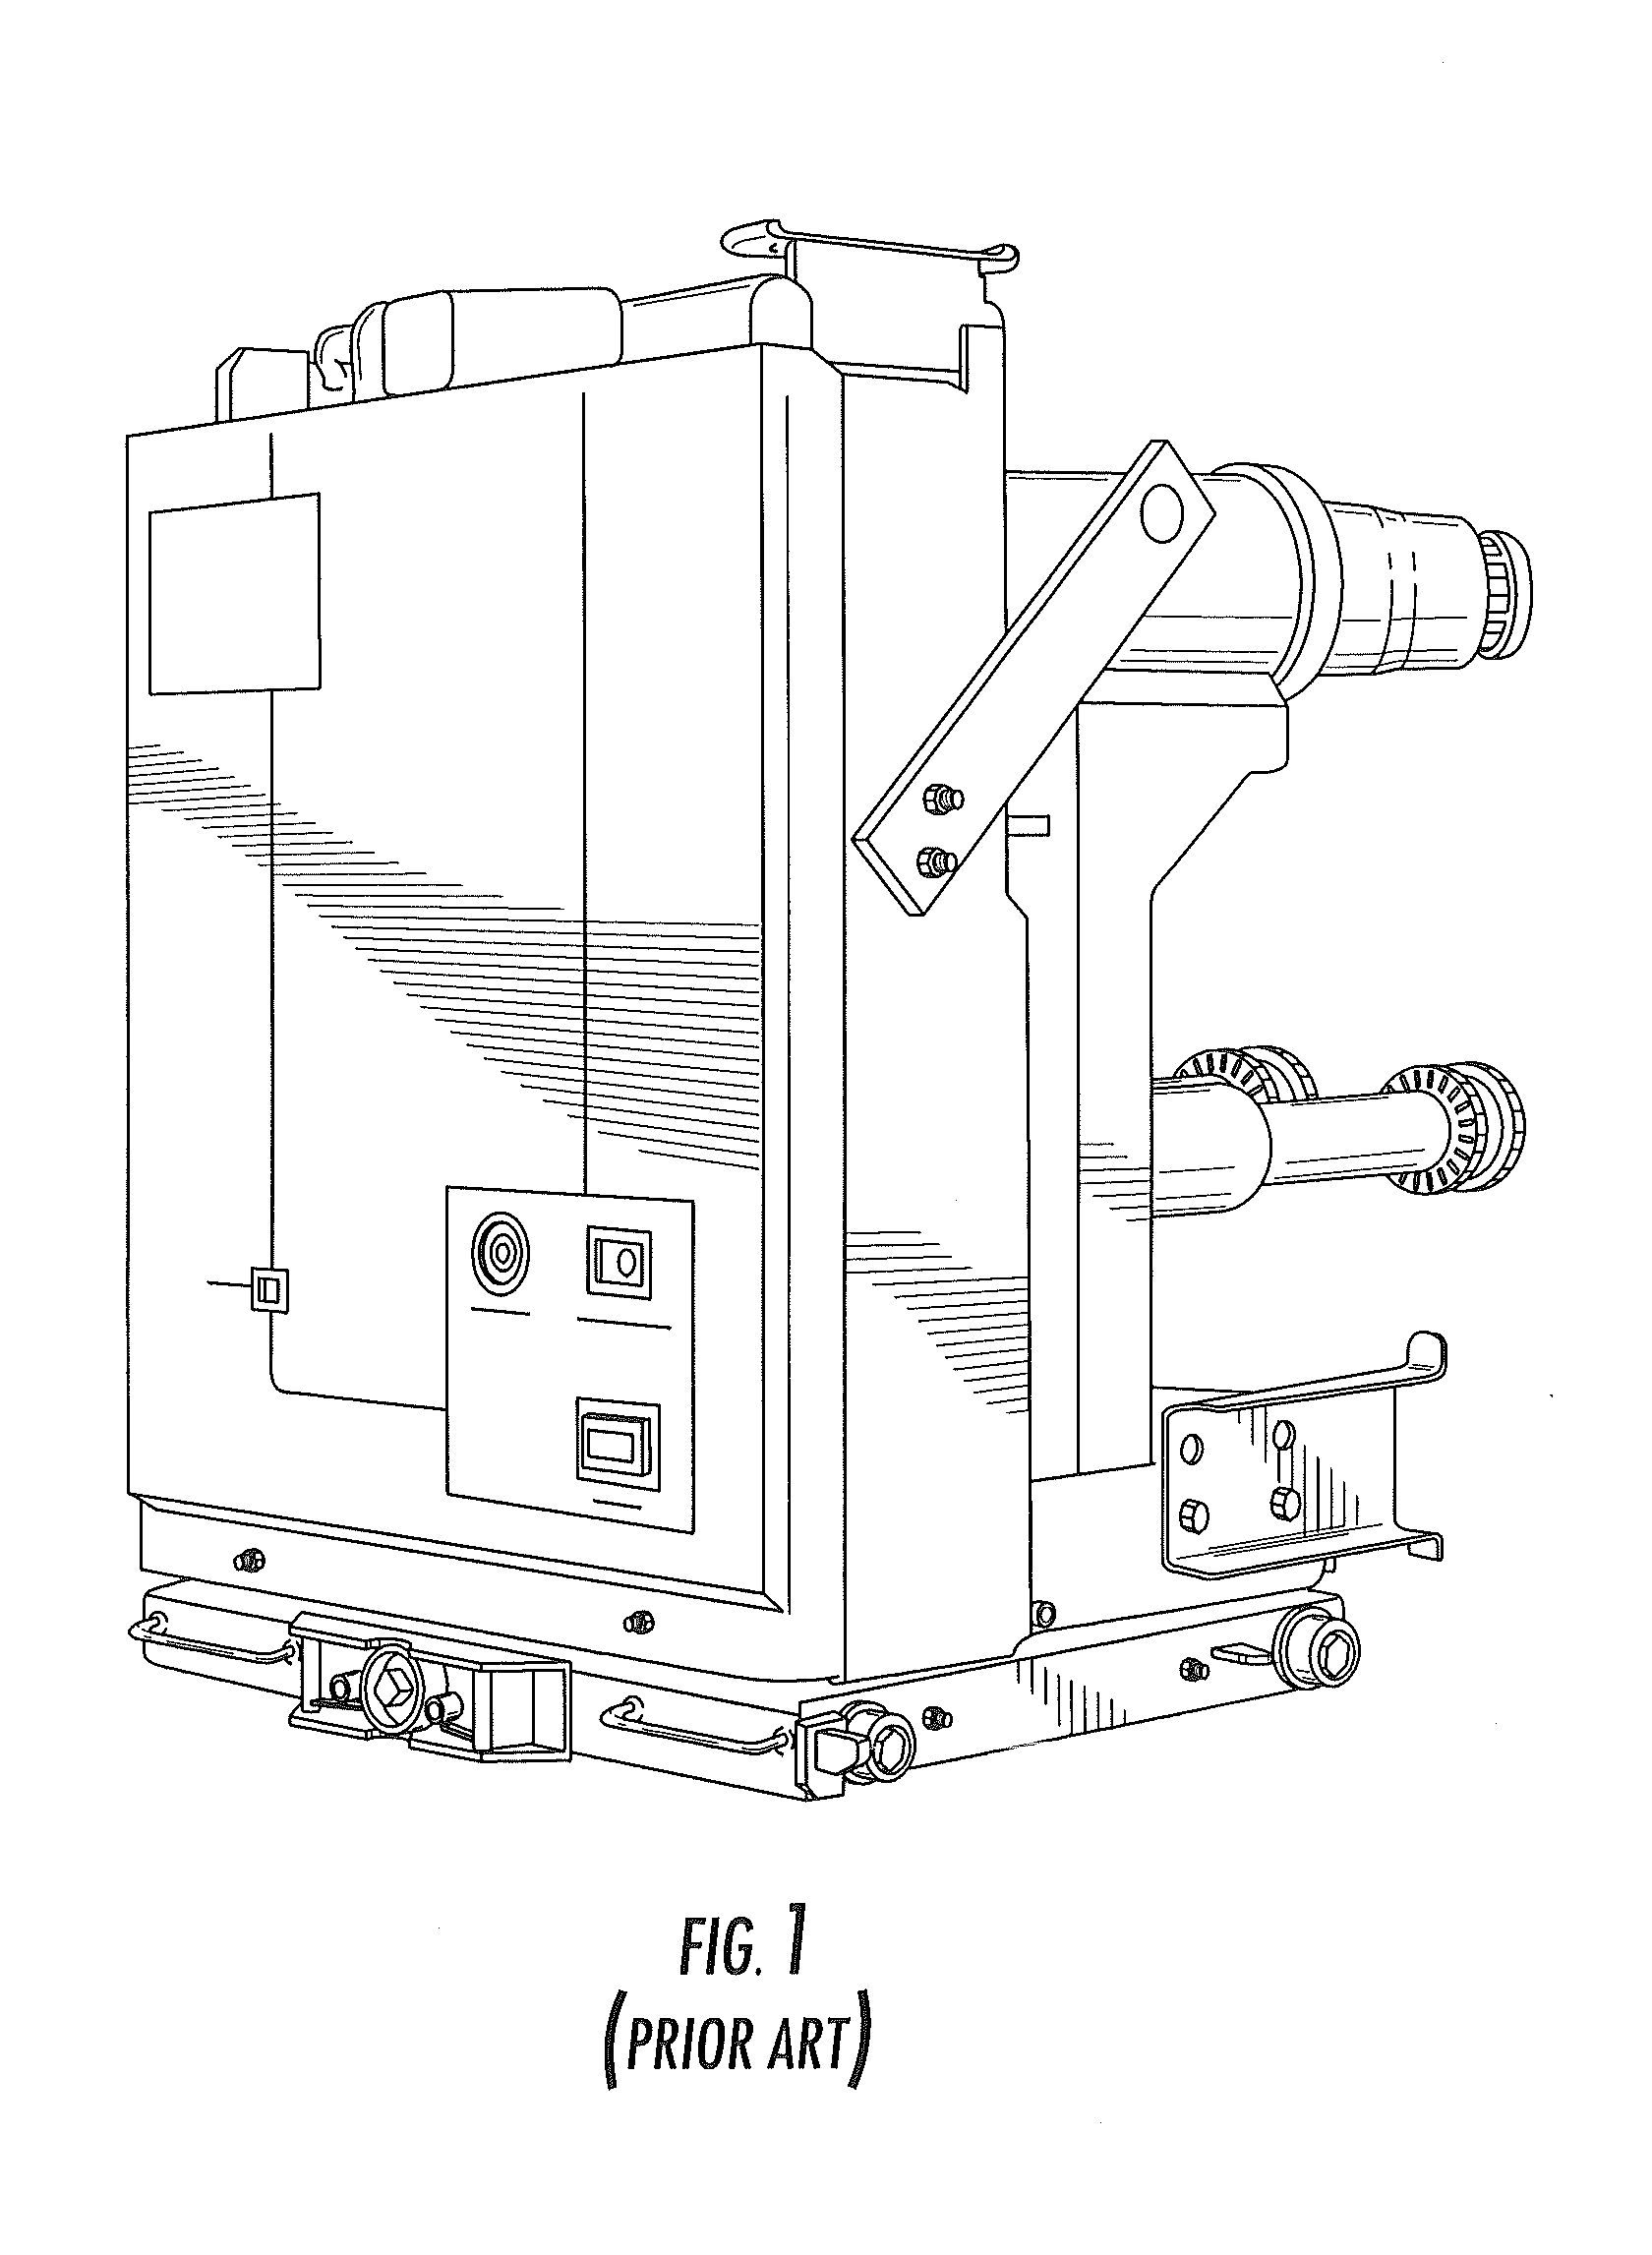 Withdrawable contactor trucks with integral motorized levering-in, related swtichgear, kits and methods